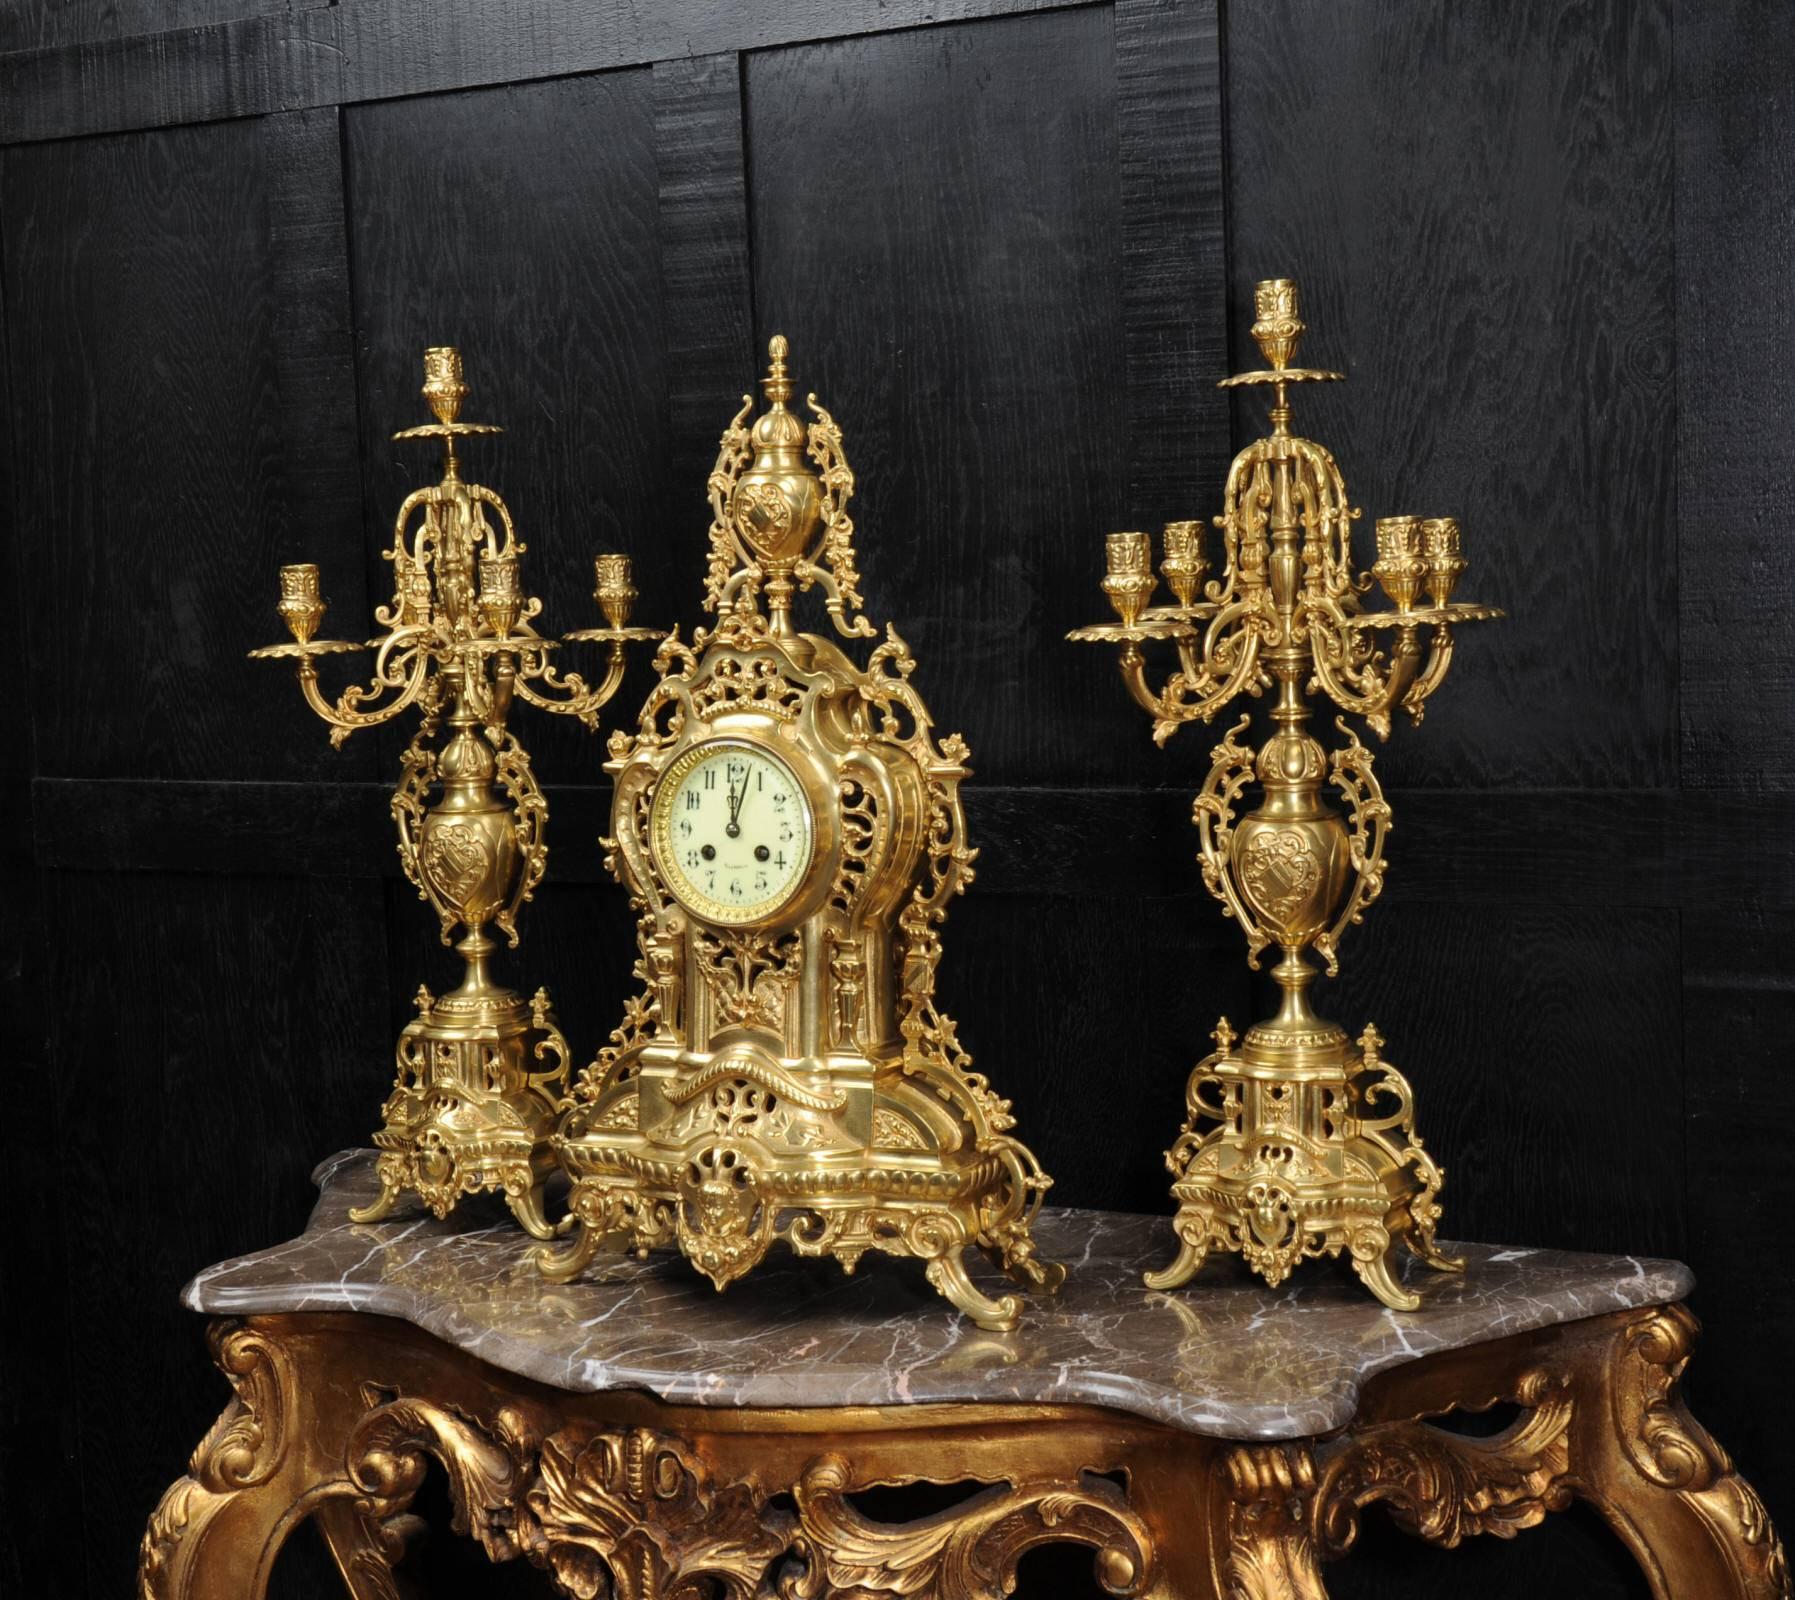 A very large gilt bronze clock set, circa 1880, beautifully and elaborately modelled in the Baroque style. It is profusely decorated with flowing foliage with a large urn with a coat of arms and a fretted front to allow the polished pendulum to be